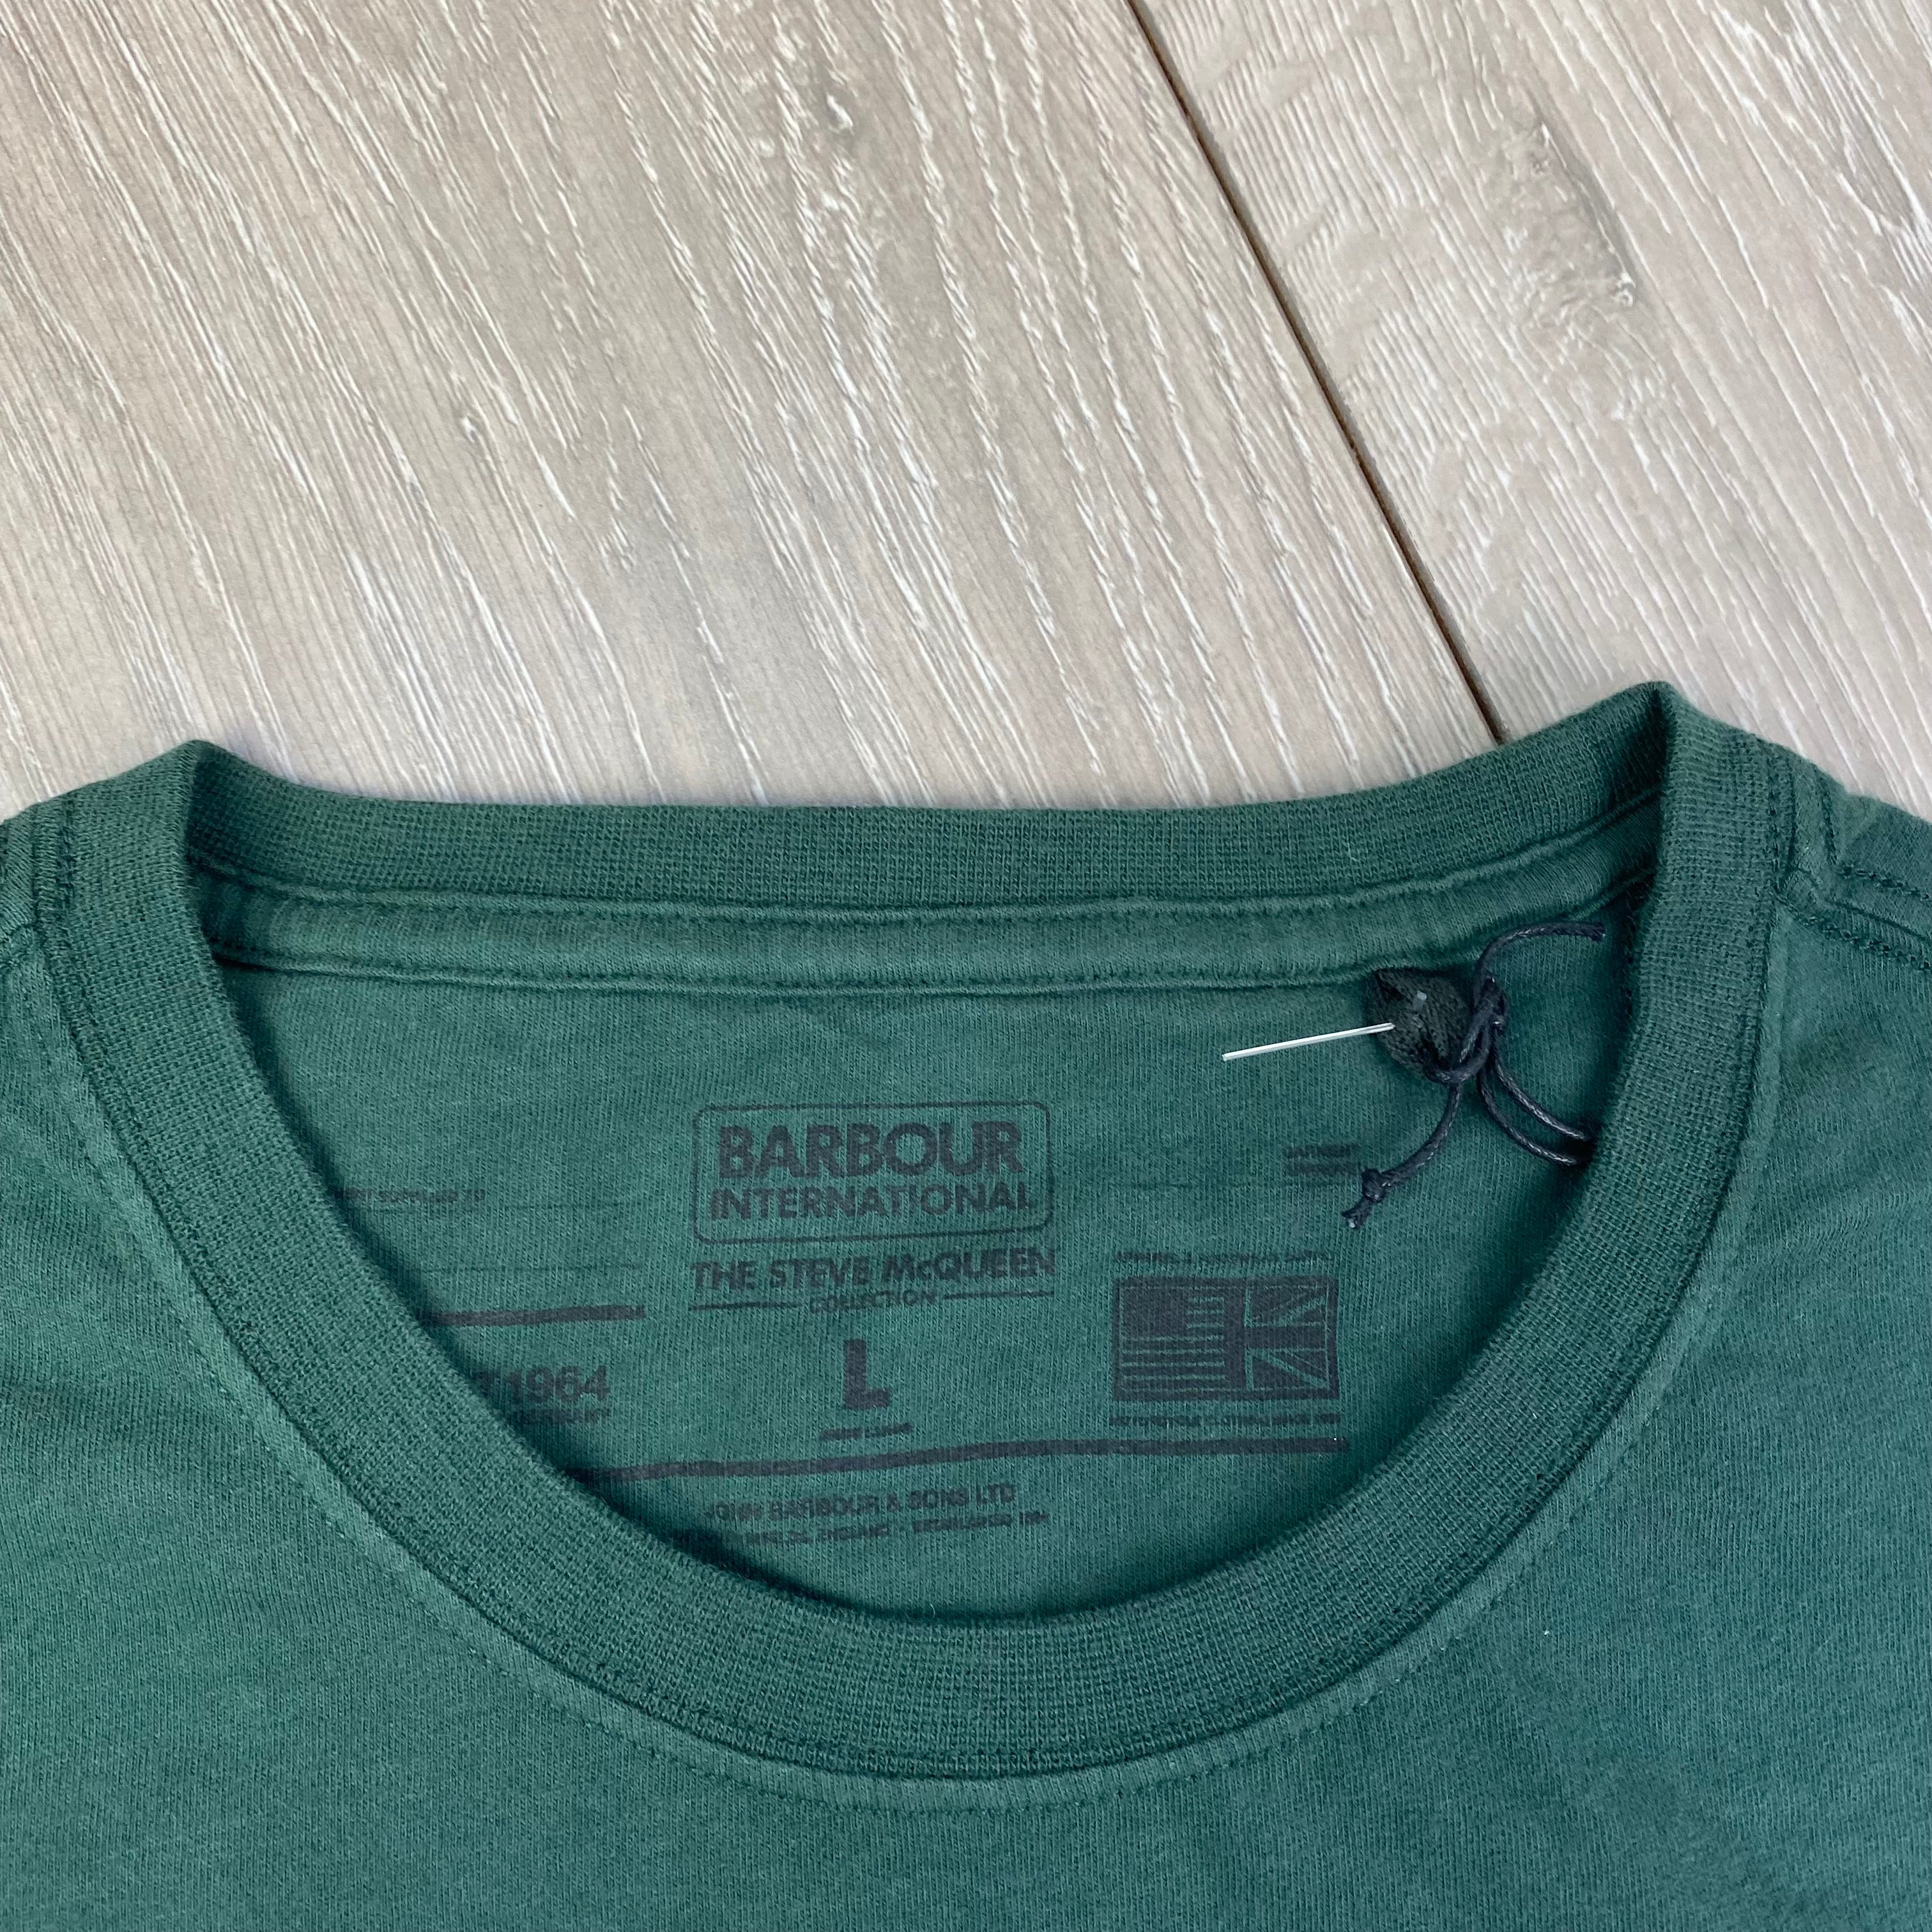 Barbour Graphic T-Shirt